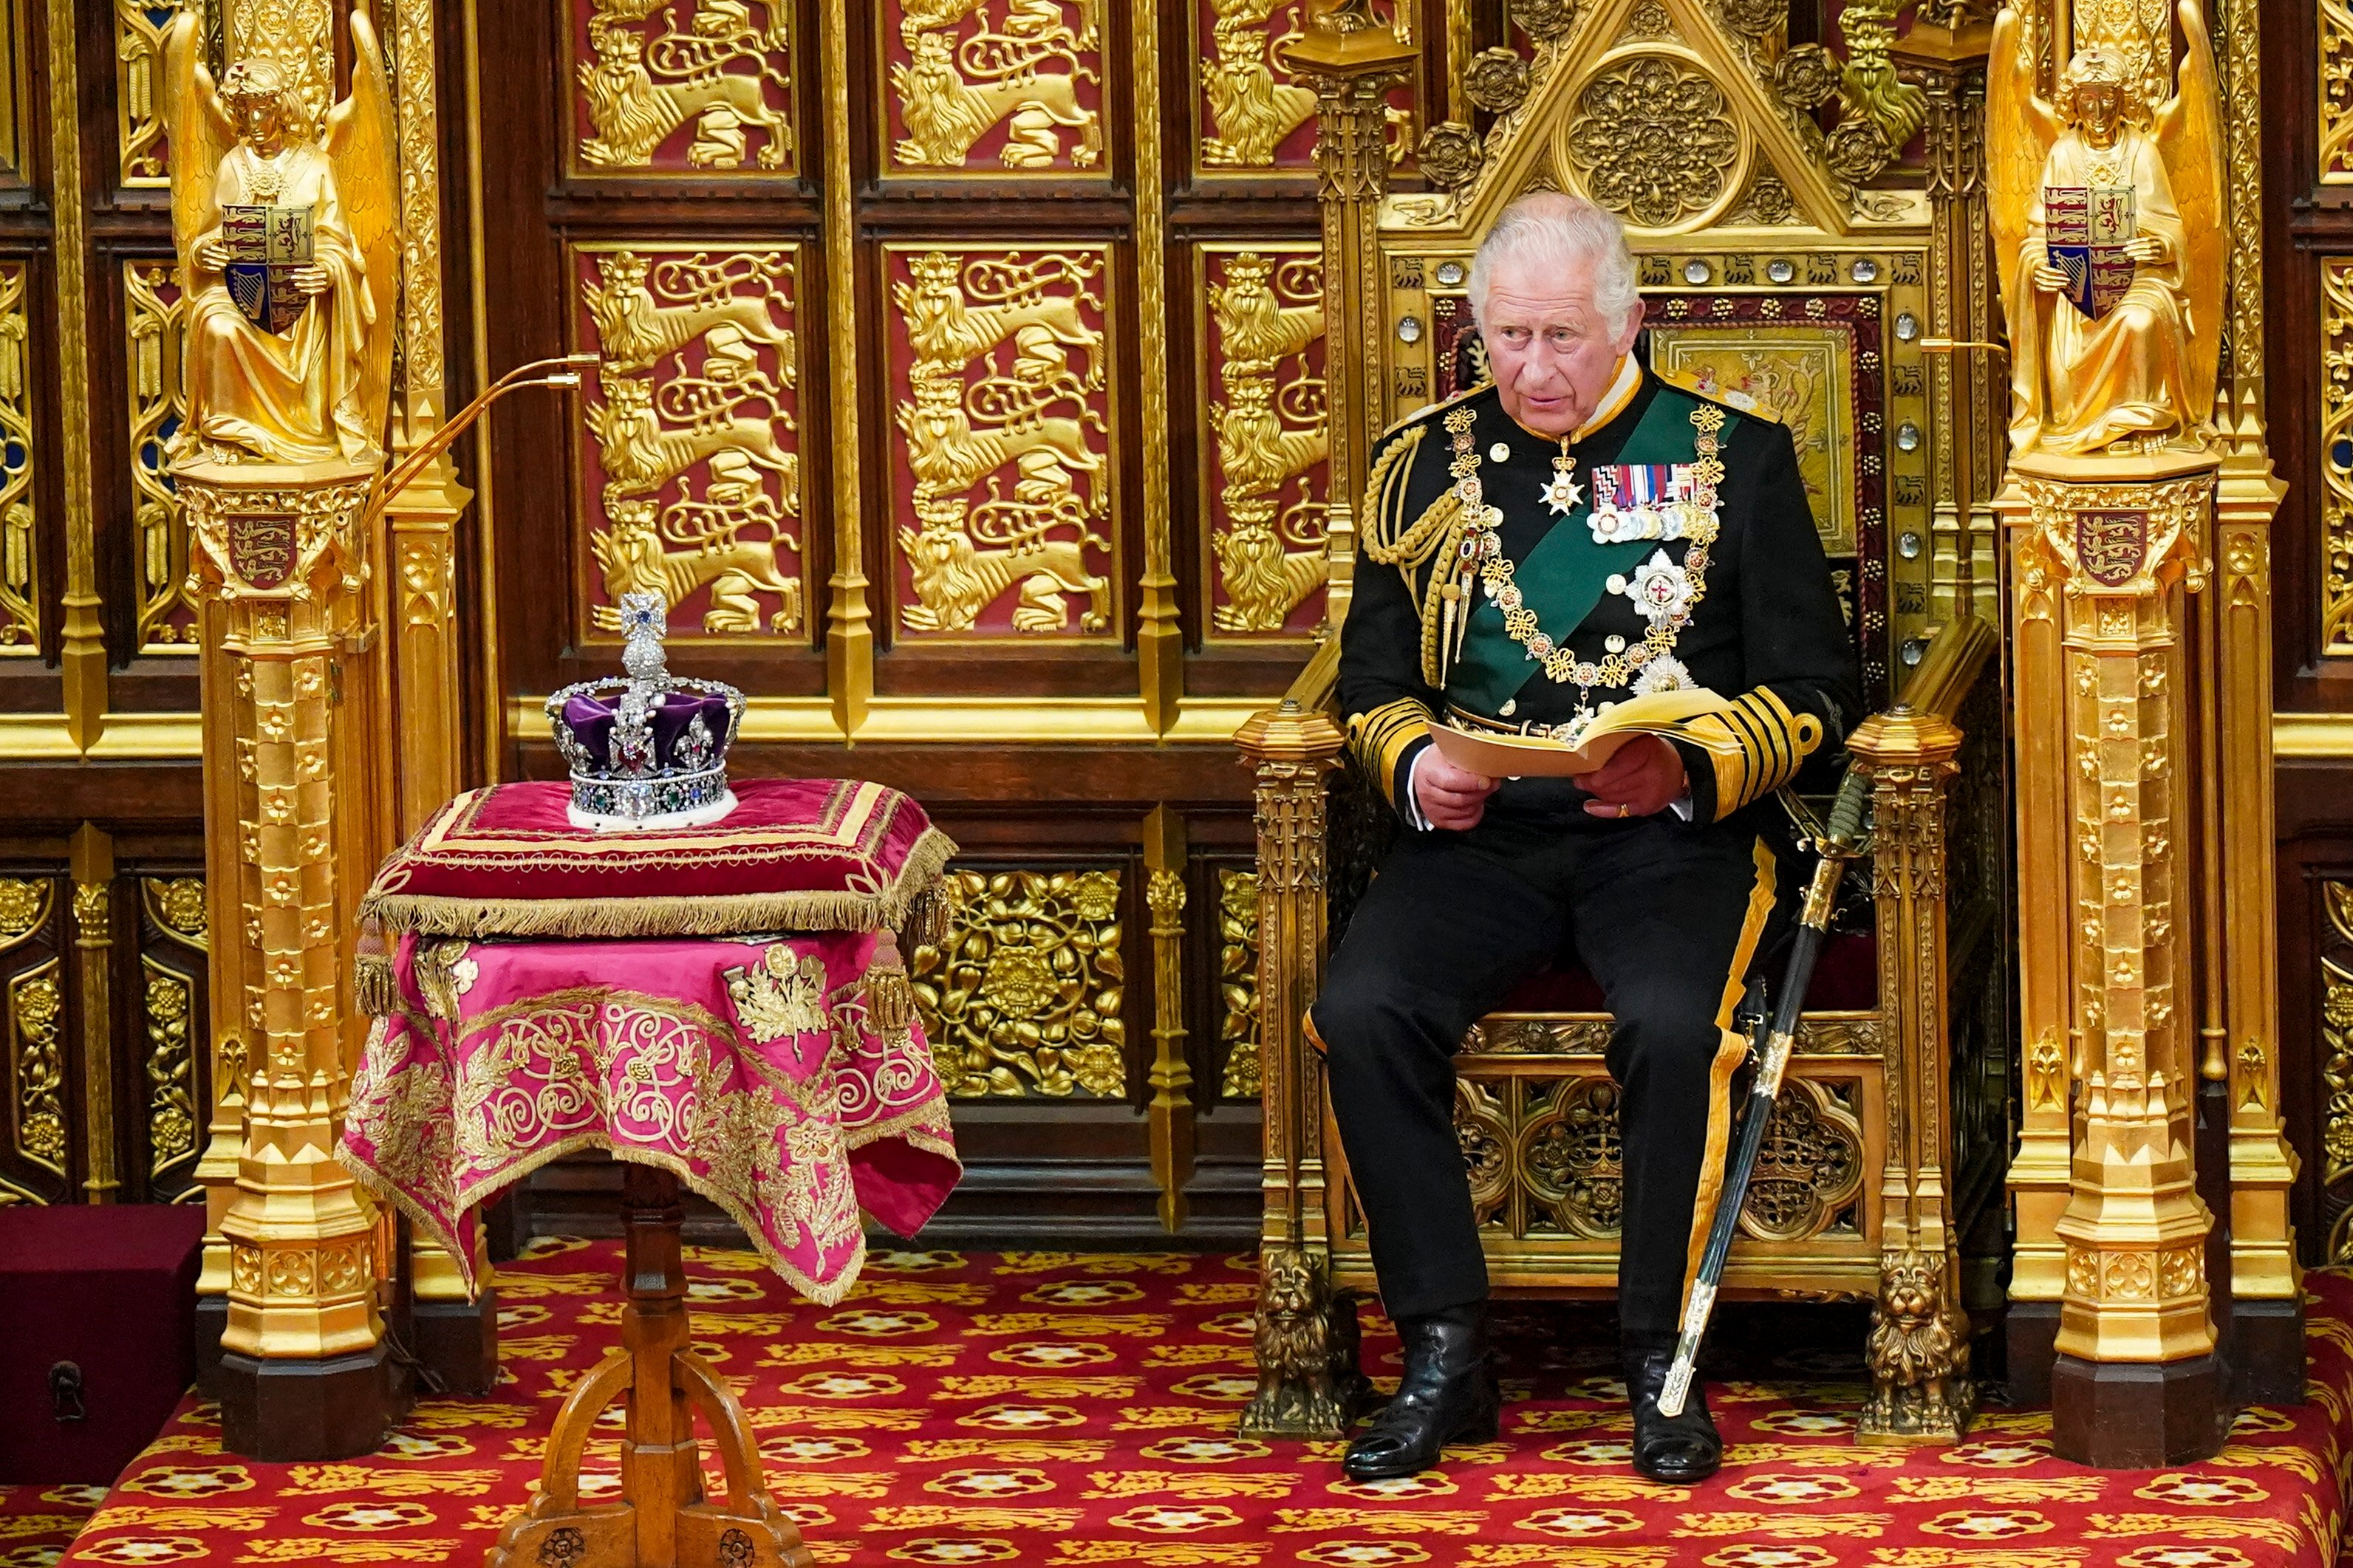 Prince Charles reading the Queen's speech during the State Opening of Parliament